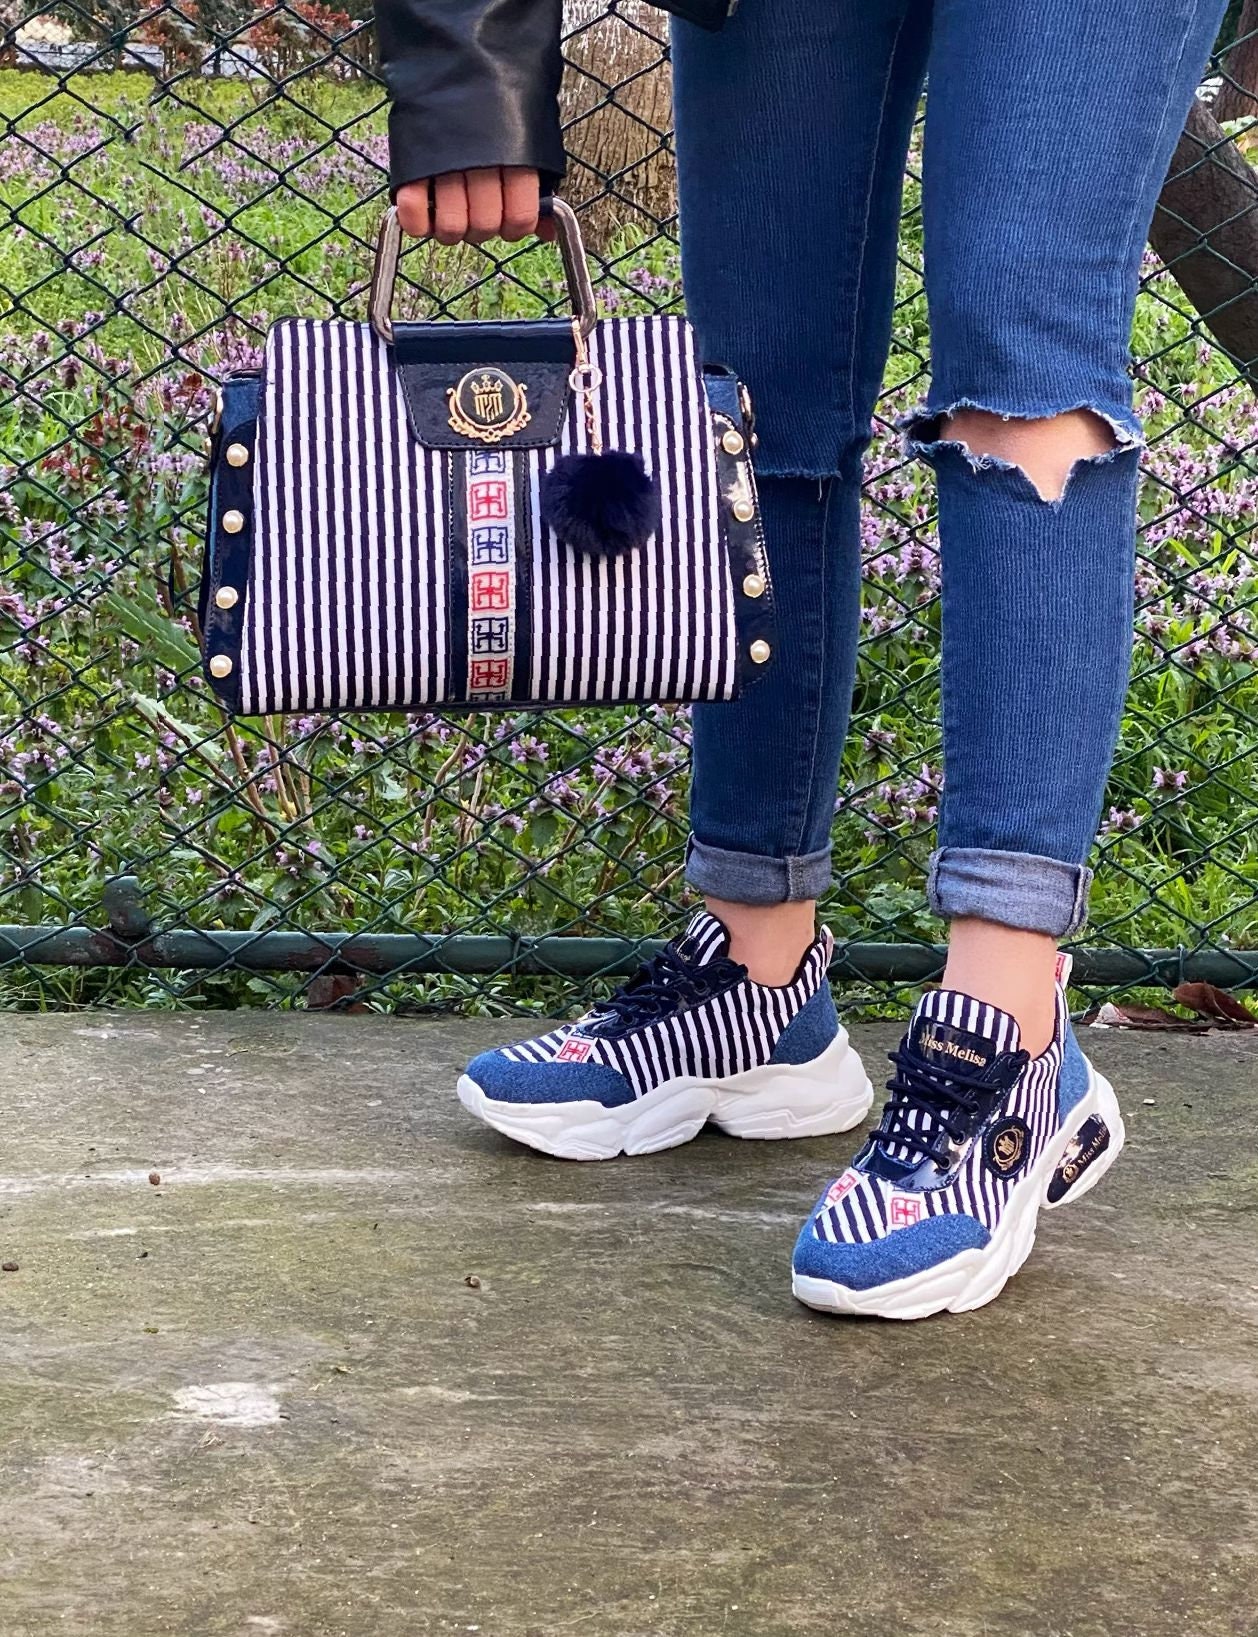 Miss Melisa Shoe and bag Women's Sneakers and Bags Special Design of the New Year 2022 Model S169